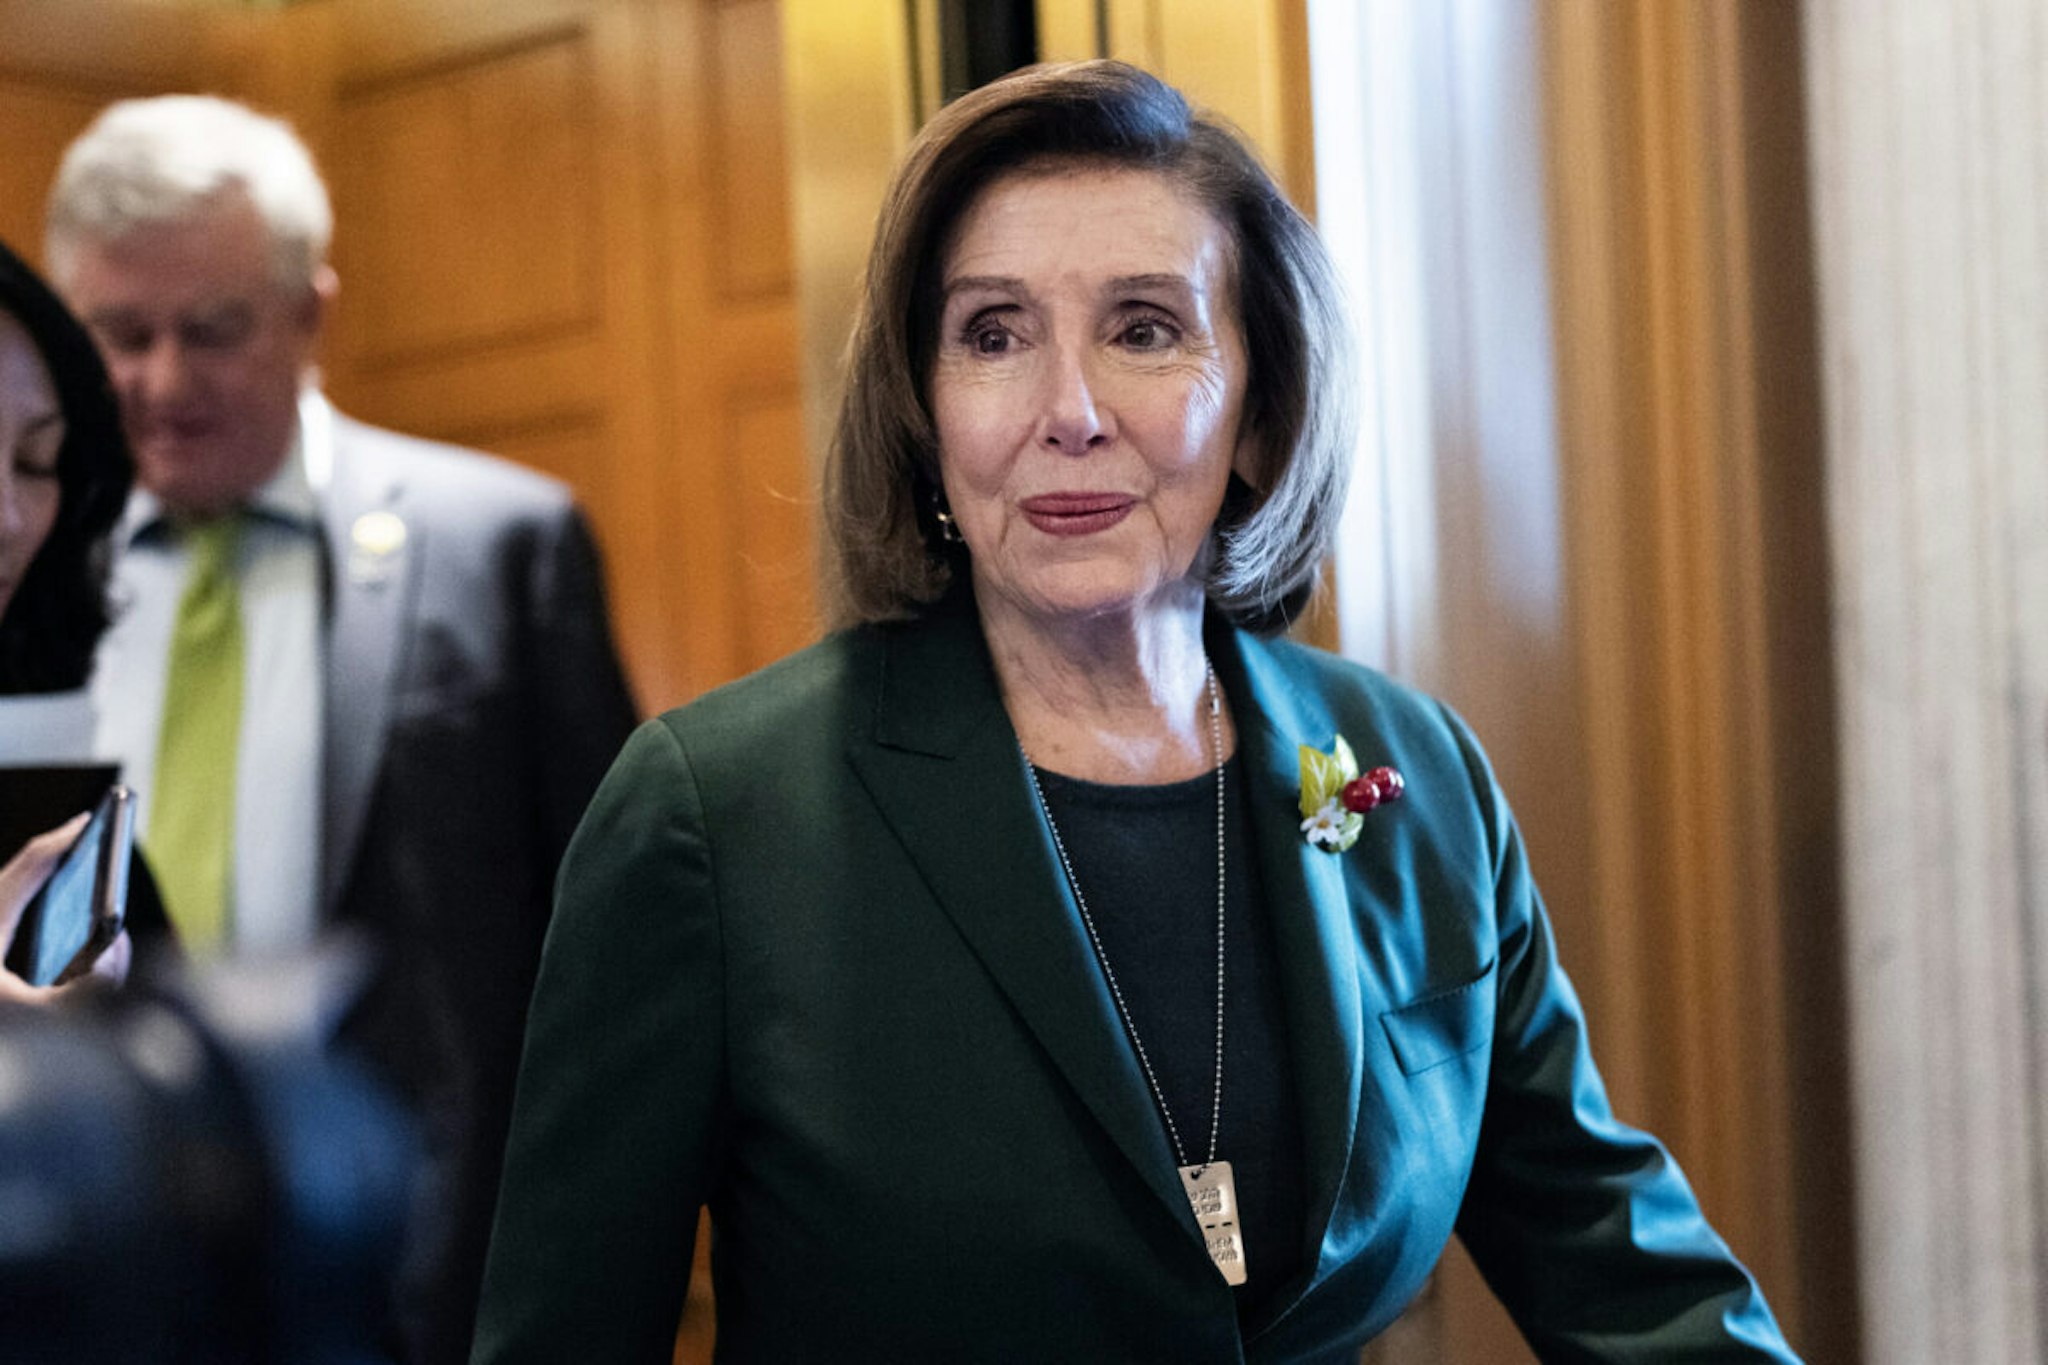 UNITED STATES - DECEMBER 14: Rep. Nancy Pelosi, D-Calif., arrives to the U.S. Capitol for the last votes of the year on Thursday, December 14, 2023.